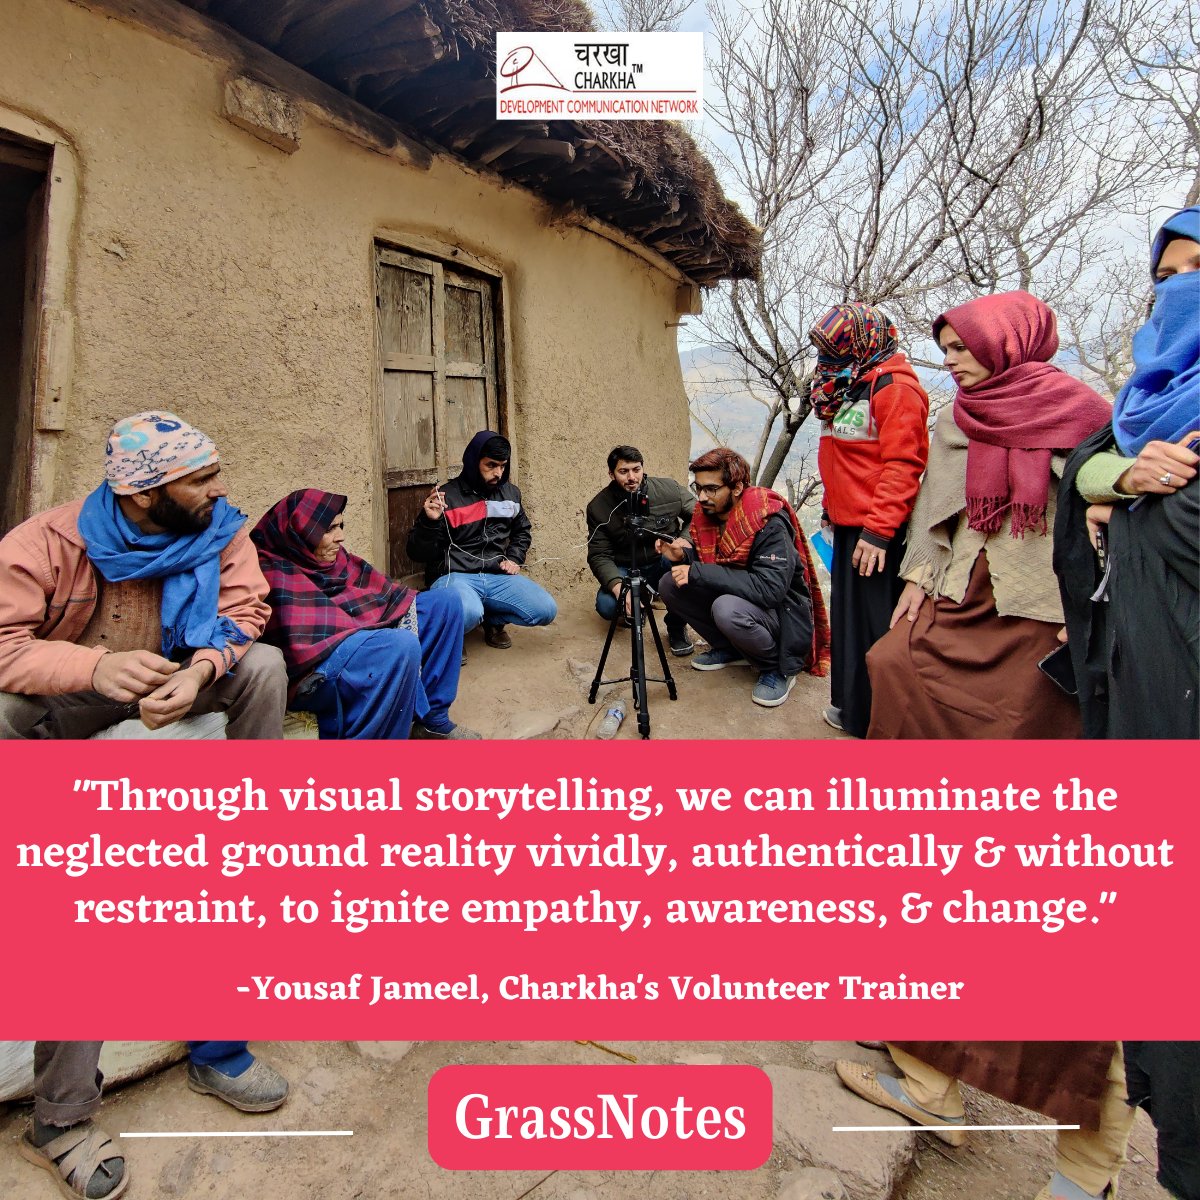 #GrassNotes | This week, we bring to you the story of Yousaf Jameel, Charkha’s Volunteer Trainer from the remote village of Poonch in Jammu and Kashmir. (1/7)

Read👇🏽

#AmplifyingUnheardVoices #LocalNewspapers #VoiceOfTheCommunity #PressingIssues

@GReportIndia @ChetnaKVerma